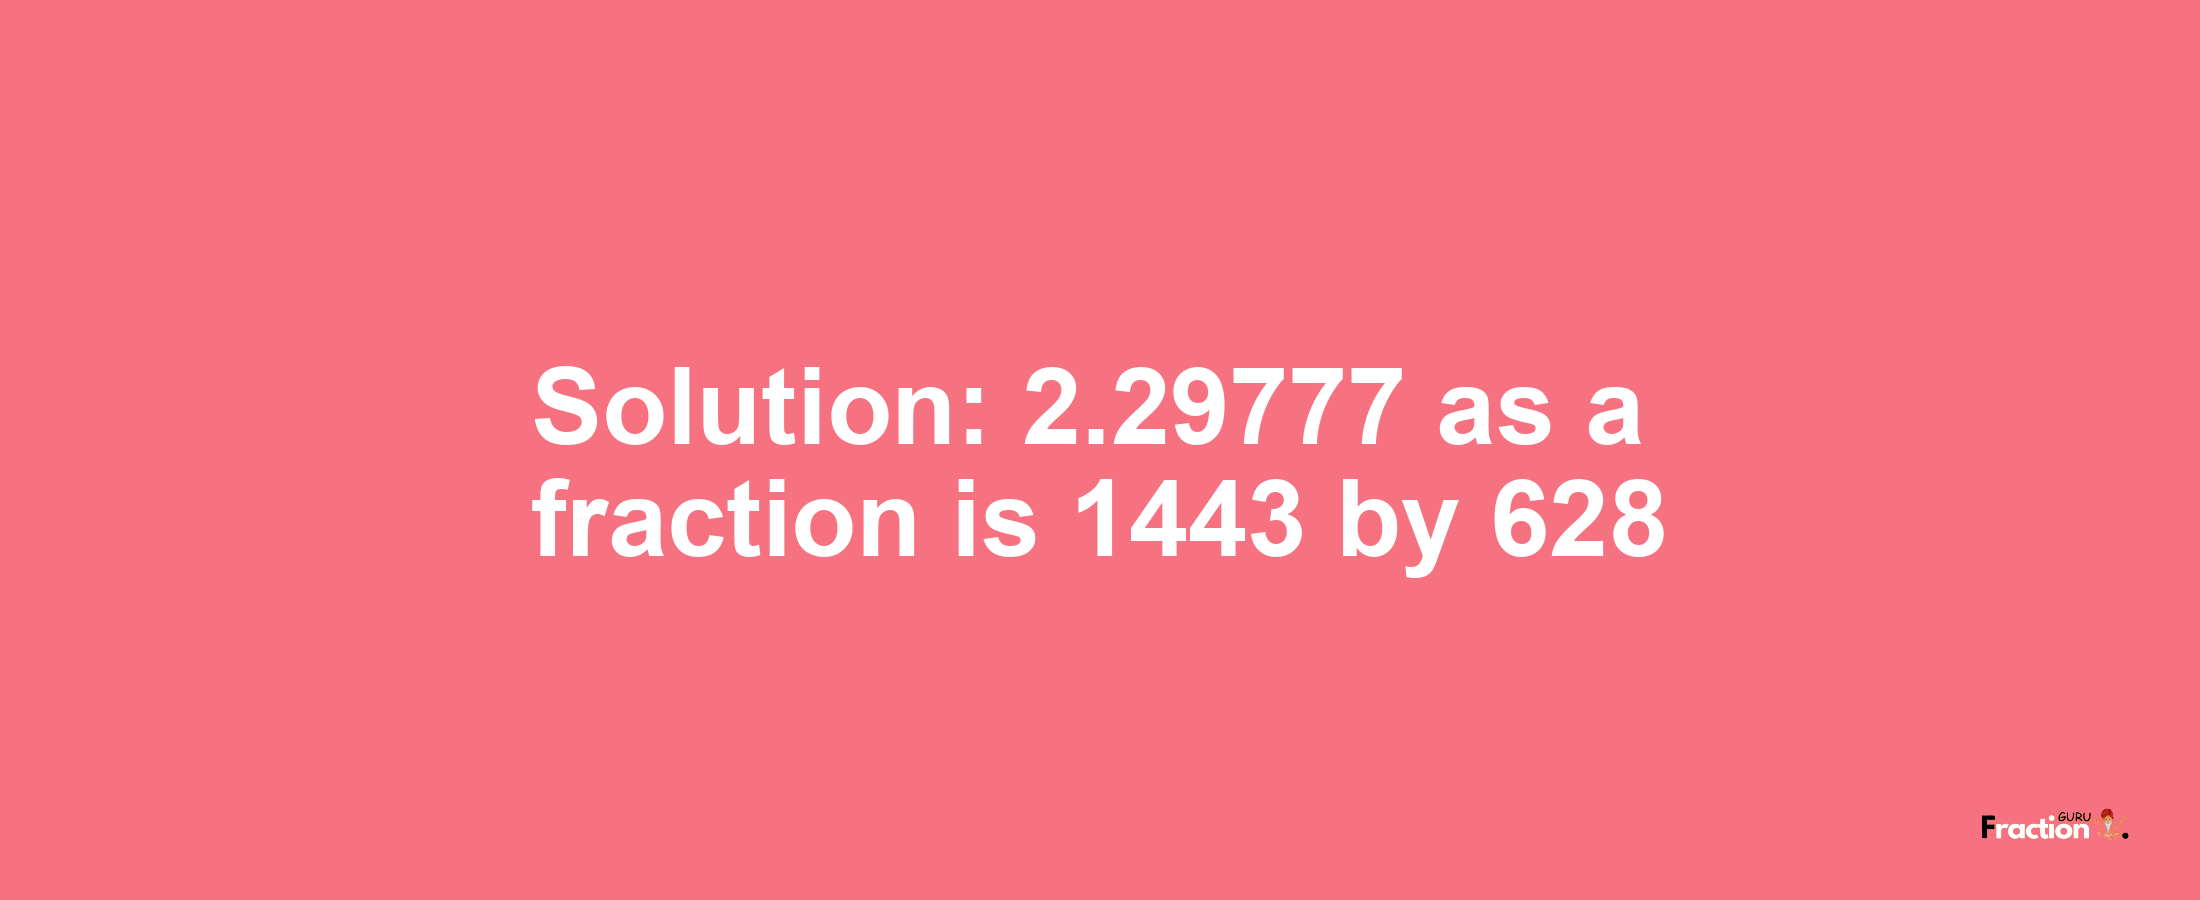 Solution:2.29777 as a fraction is 1443/628